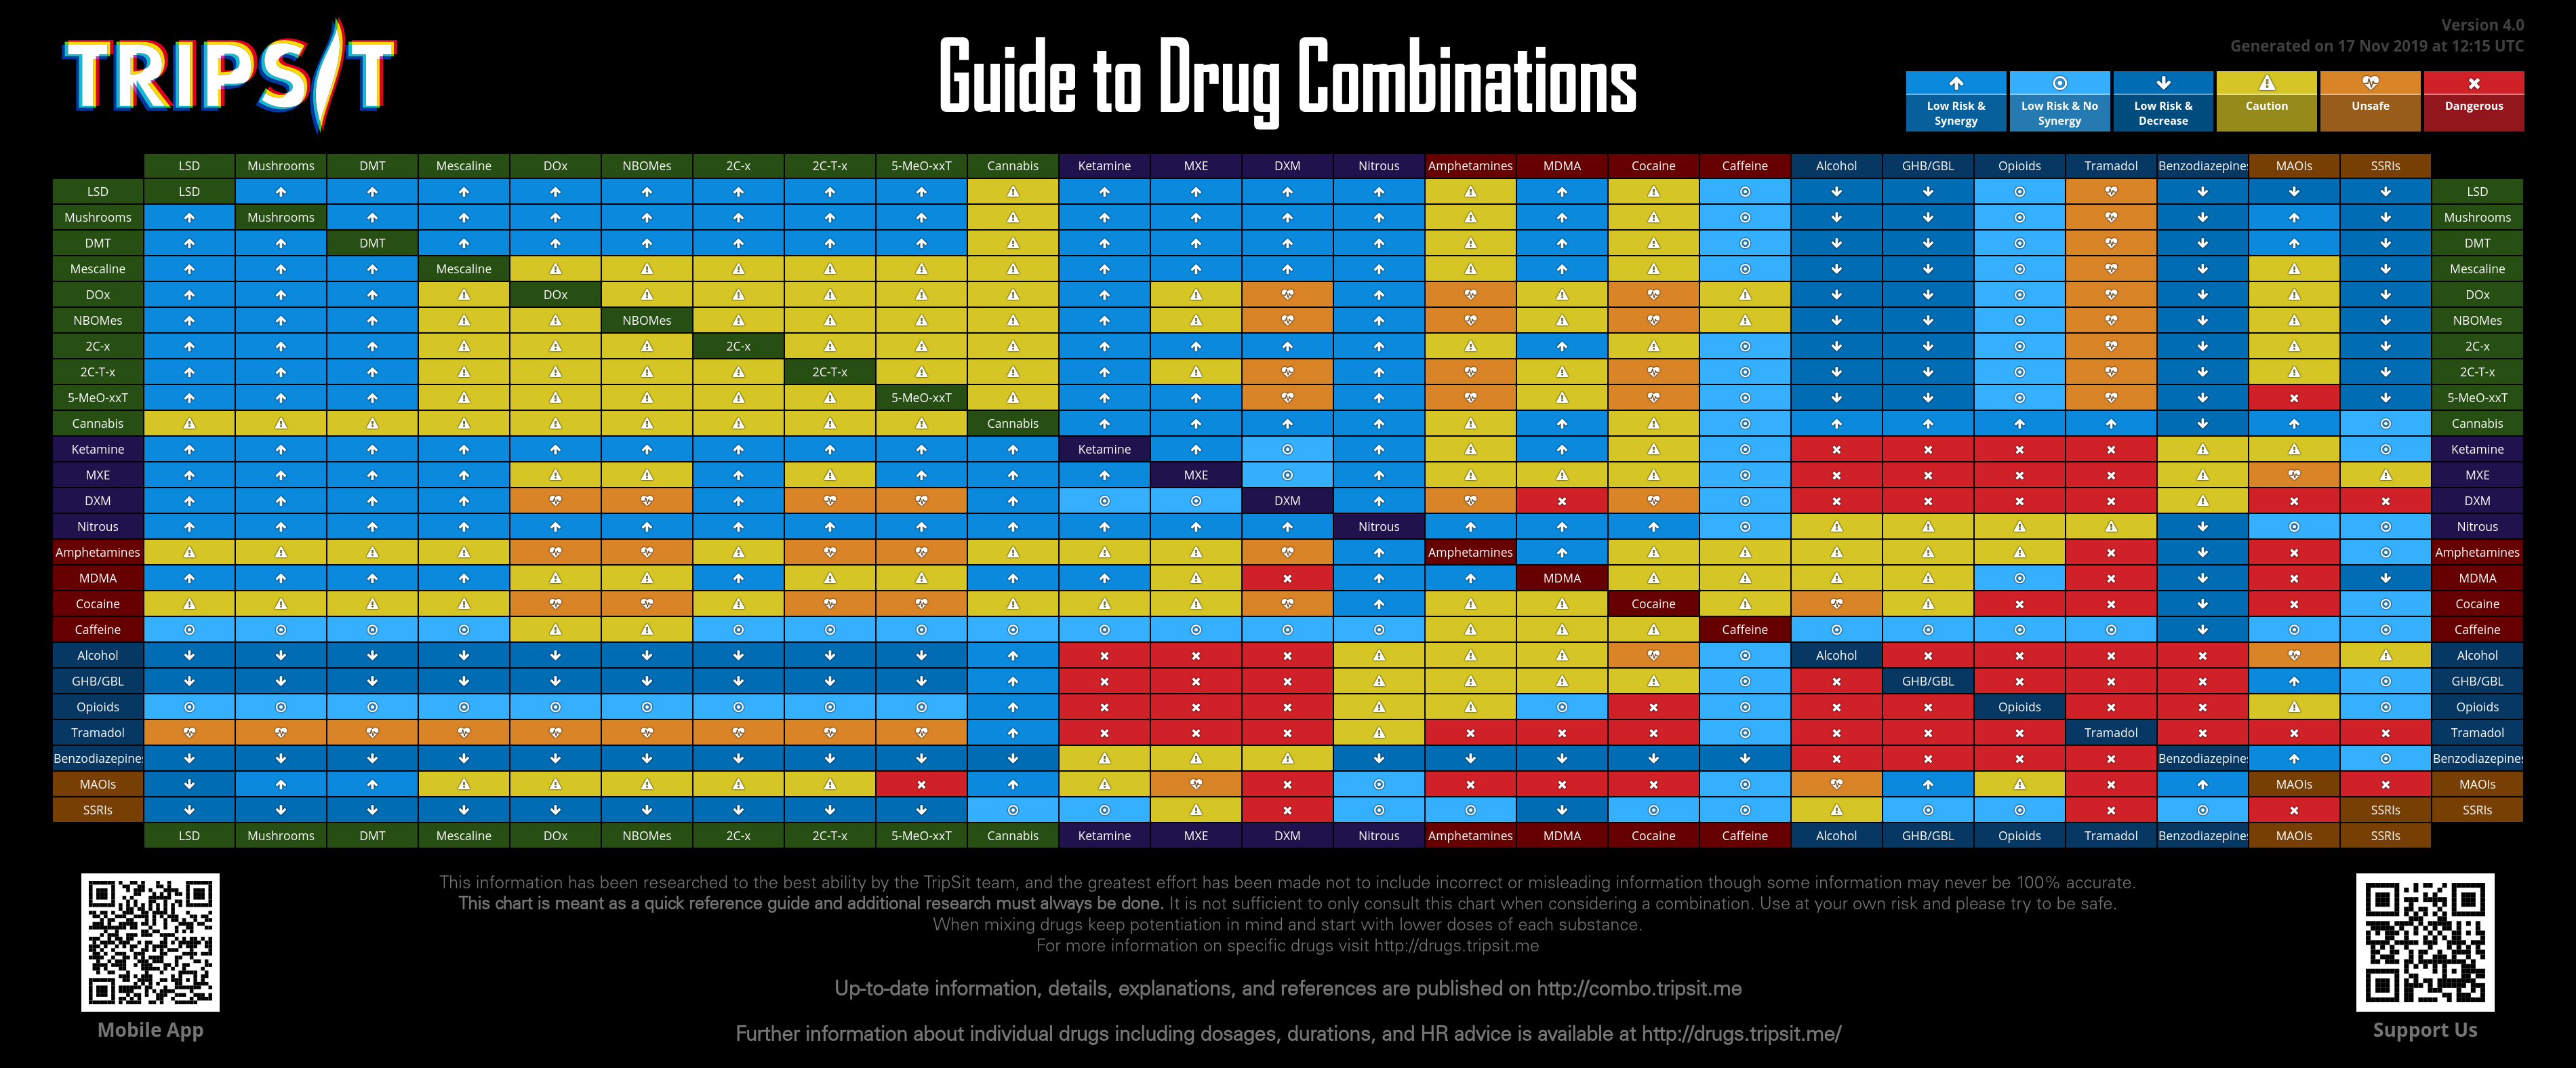 TripSit's guide to drug combos